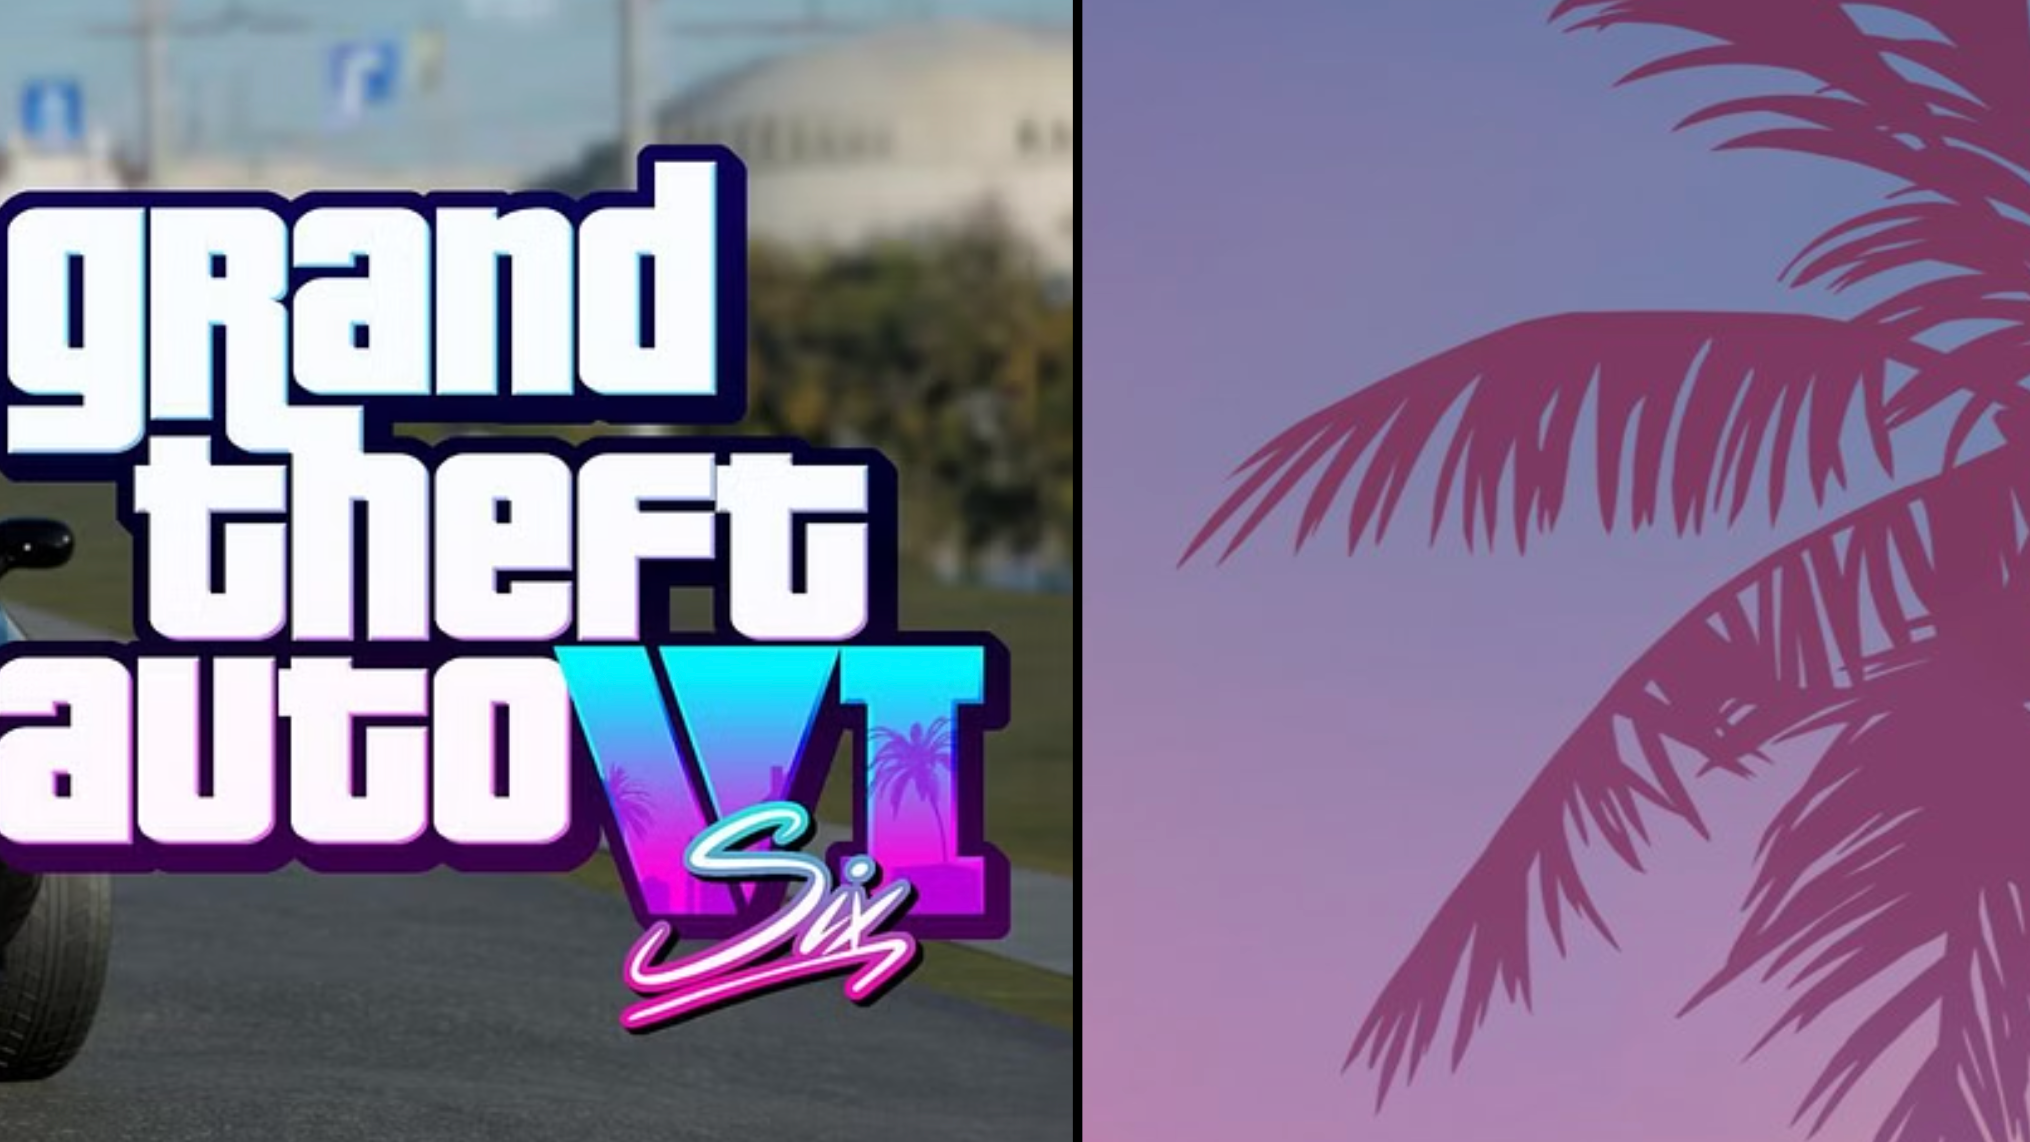 NEXT GTA TRAILER OFFICIALLY TEASED - A Message from Rockstar Games